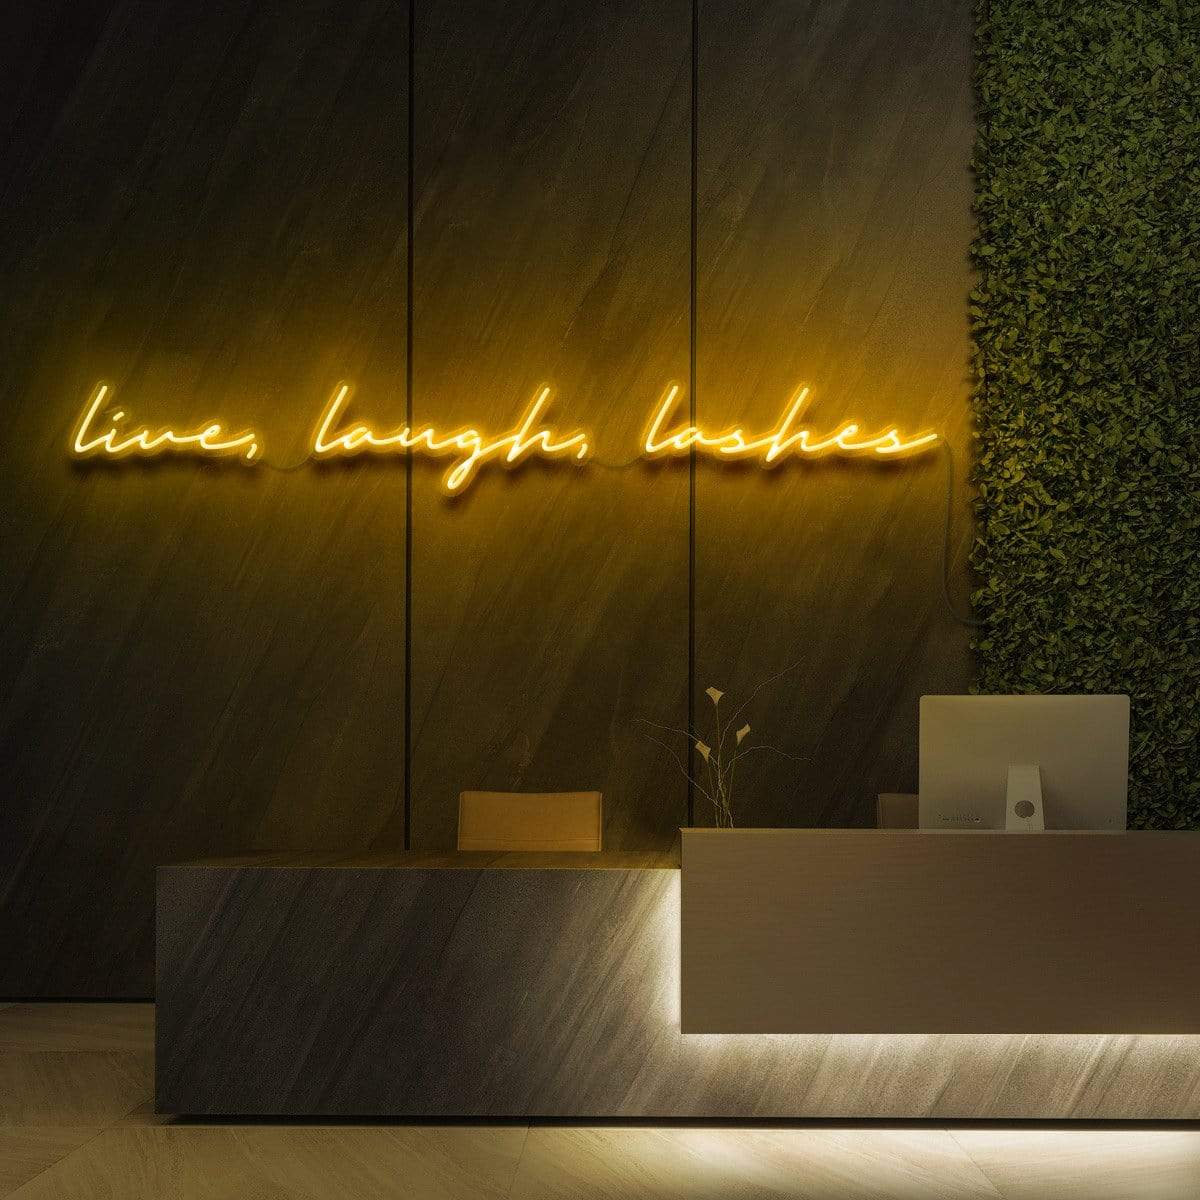 "Live, Laugh, Lashes" Neon Sign for Beauty & Cosmetic Studios